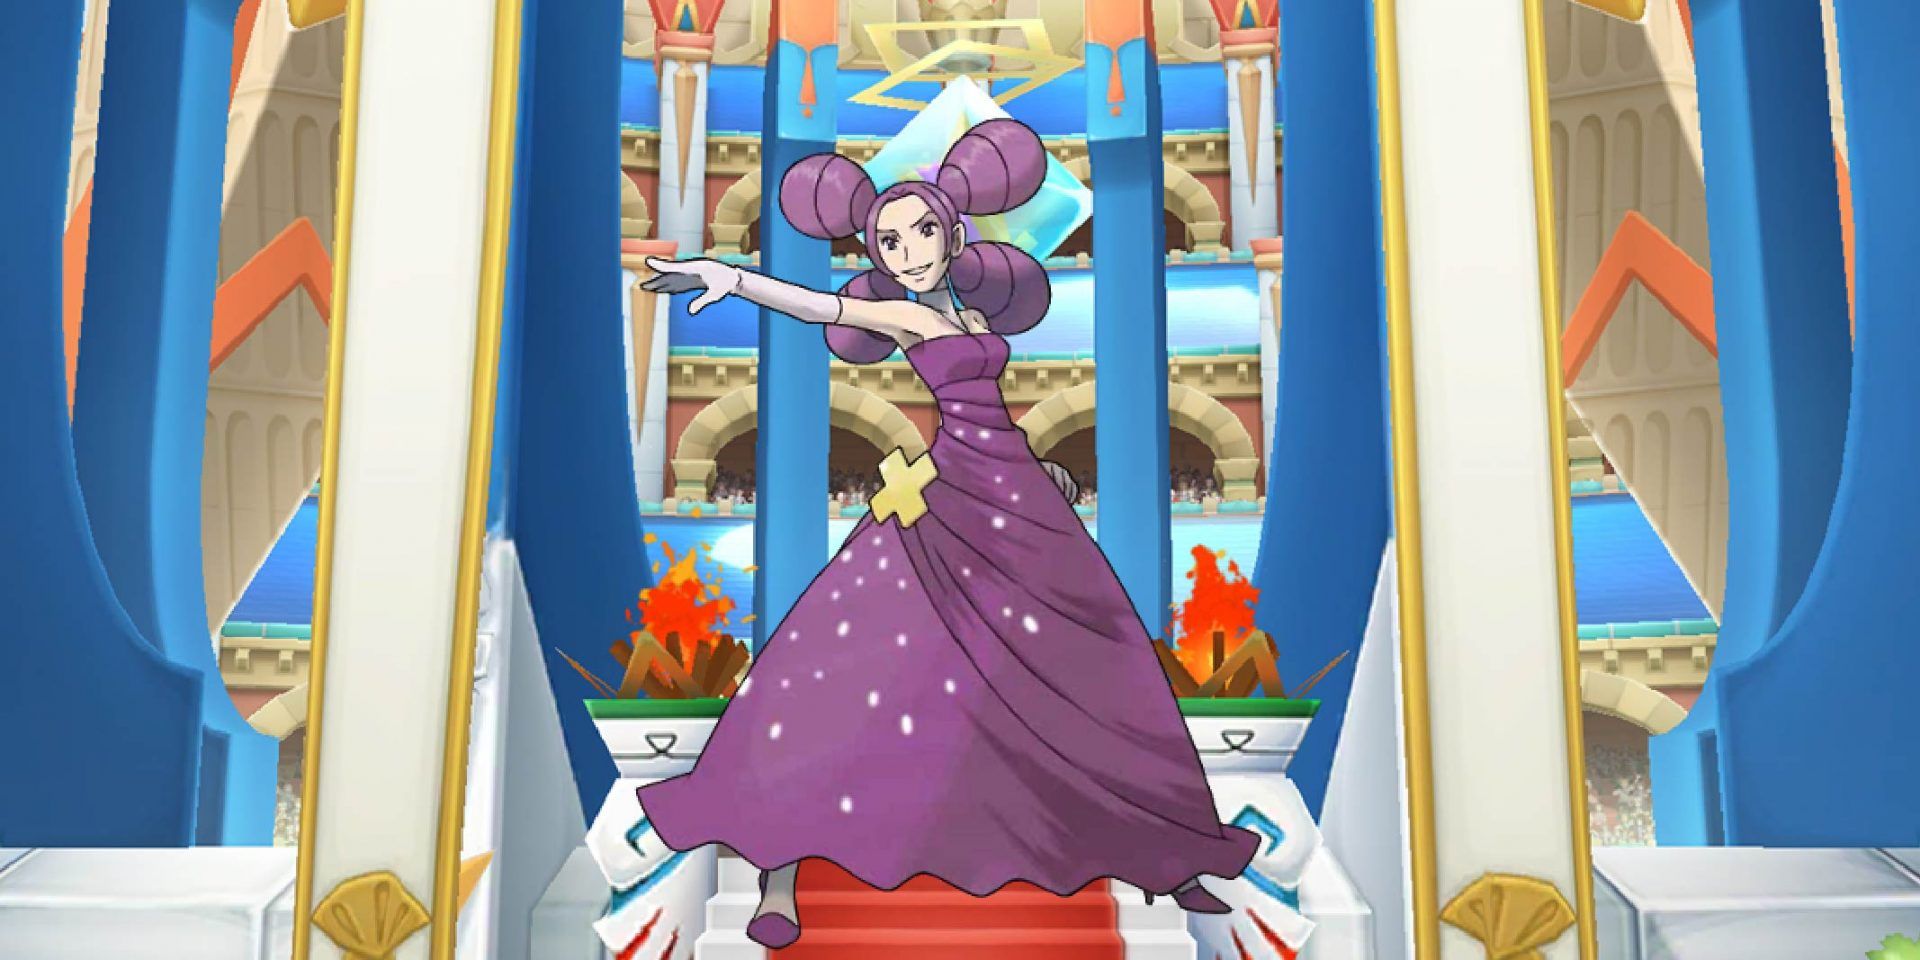 Fantina from Pokémon standing against an arena backdrop.